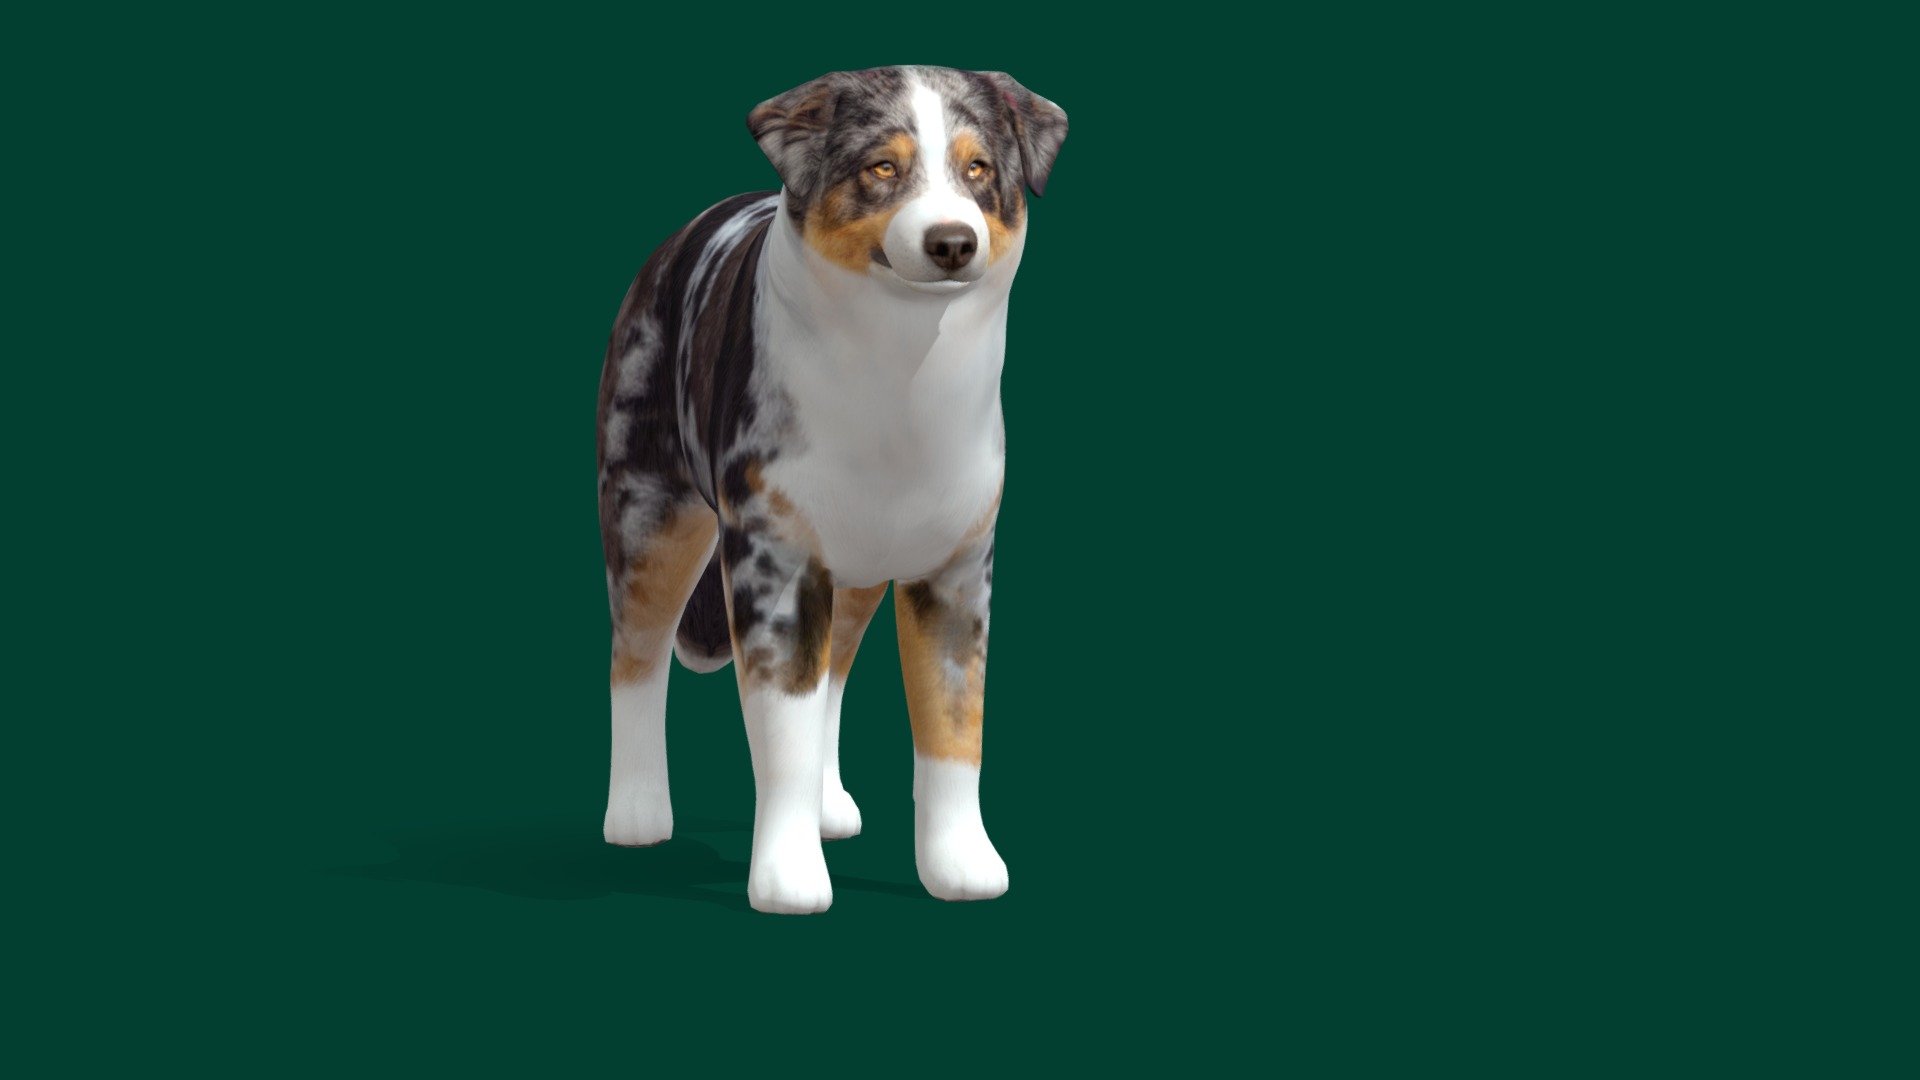 Australian Shepherd Dog Game Ready Animations 4K PBR Textures Material.
**8 Animations **
Idle 1 Idle 2 Idle 3 ,Attack,Die,Eat,Walk,Run
Unity Unreal Ready.
Diffuse ,Metallic,Roughness,Normal Map.

The Australian_Shepherd is a breed of herding_dog from the United States. The name of the breed is technically a misnomer, as it was developed in California in the 19th century, although it has its origins in Asturias, in the northwest of Spain; the breed was unknown in Australia at the time. Canis_lupus_familiaris
Colors: Merle, Black, Red Merle, Red tricolor, Black tricolor, Blue Merle, Red
Temperament: Intelligent, Good-natured, Affectionate, Active, Protective
Life span: 13 – 15 years - Australian Shepherd (Game Ready) - Buy Royalty Free 3D model by Nyilonelycompany 3d model